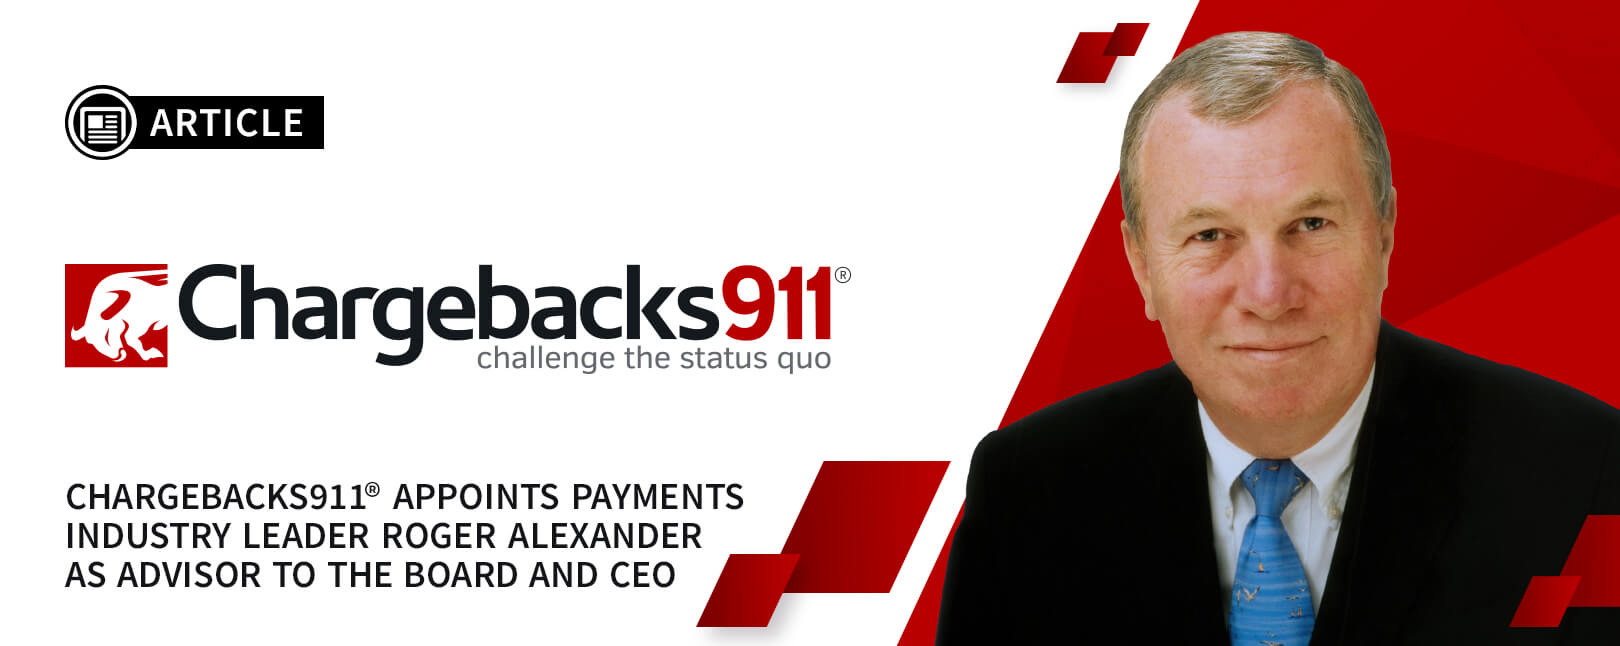 Chargebacks911® Appoints Roger Alexander as Advisor to the Board